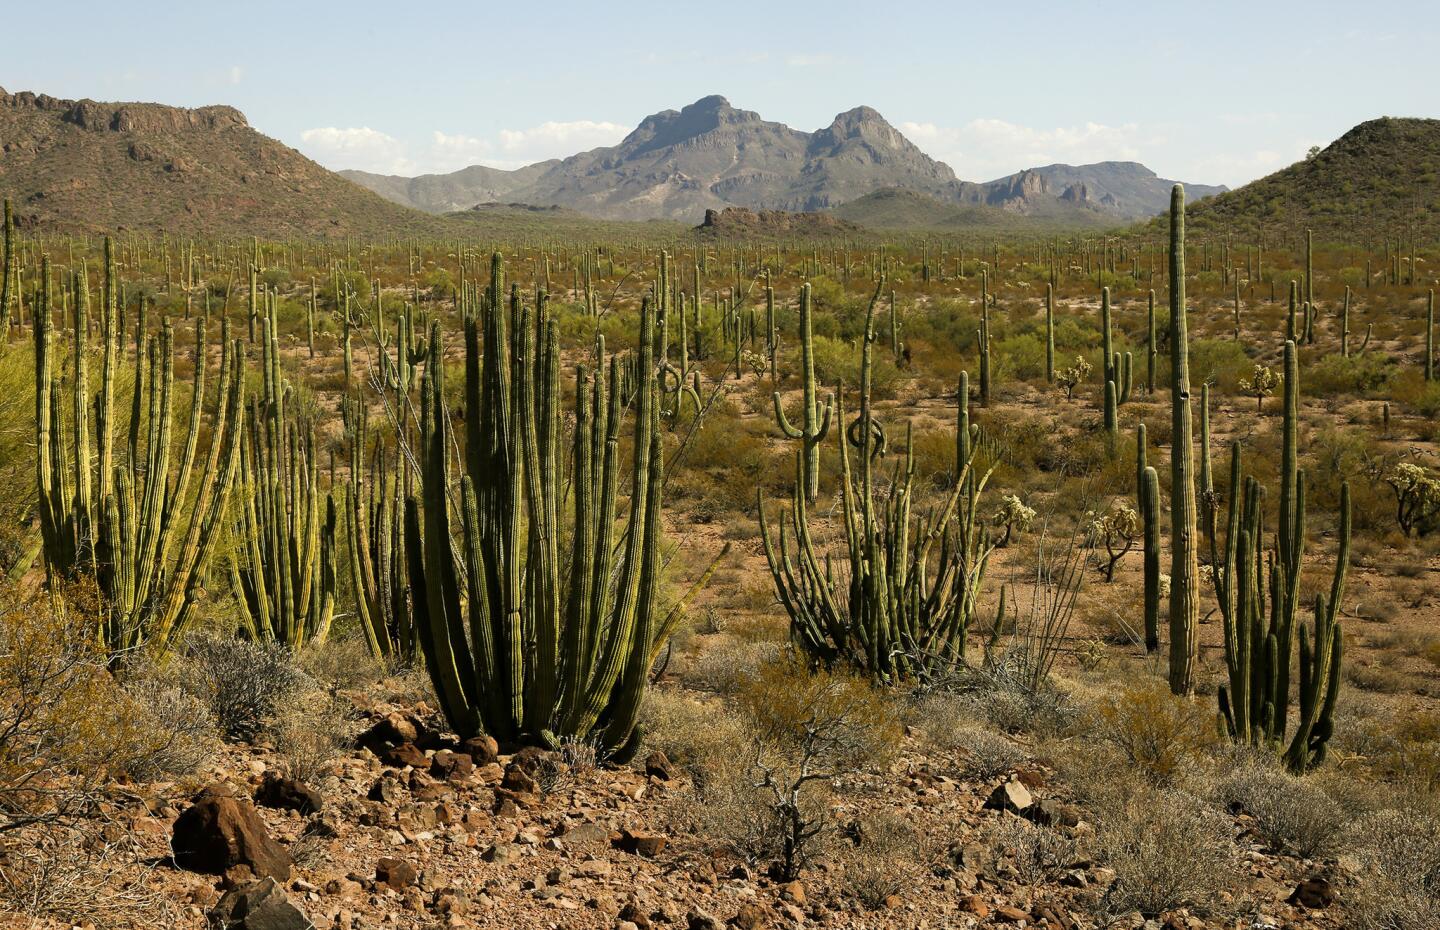 Organ Pipe Cactus National Monument lies in the heart of the Sonoran Desert and is bordered by Mexico, where U.S. Customs and Border Protection officers routinely patrol the roads and fences looking for smugglers and illegal immigration.